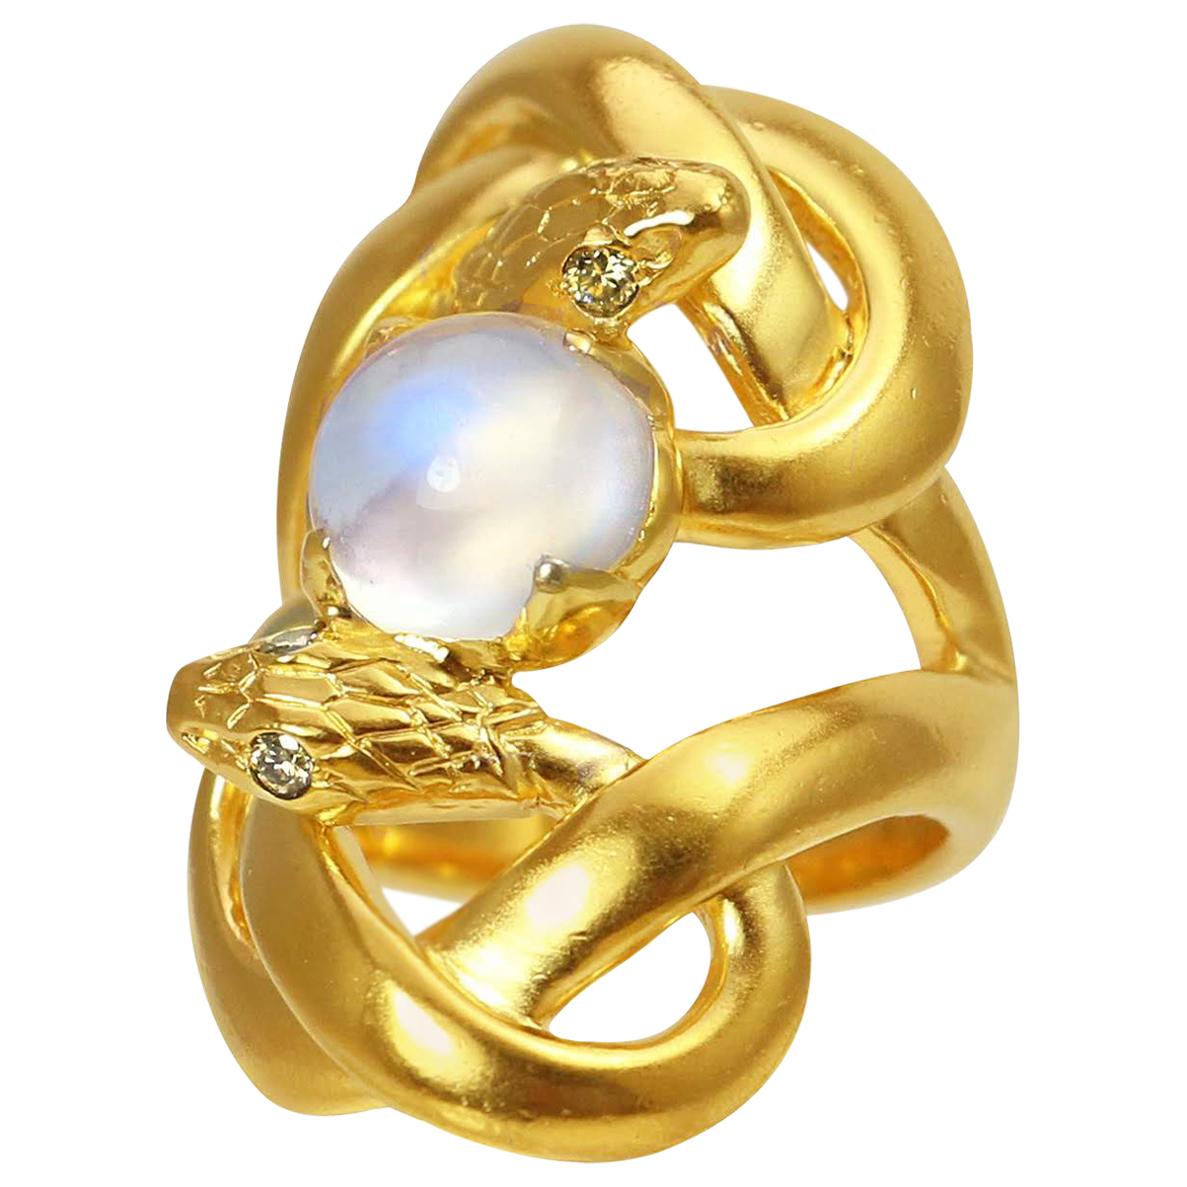 Sylvie Corbelin Unique Double Snake Ring with Moonstone in Gold and Silver For Sale